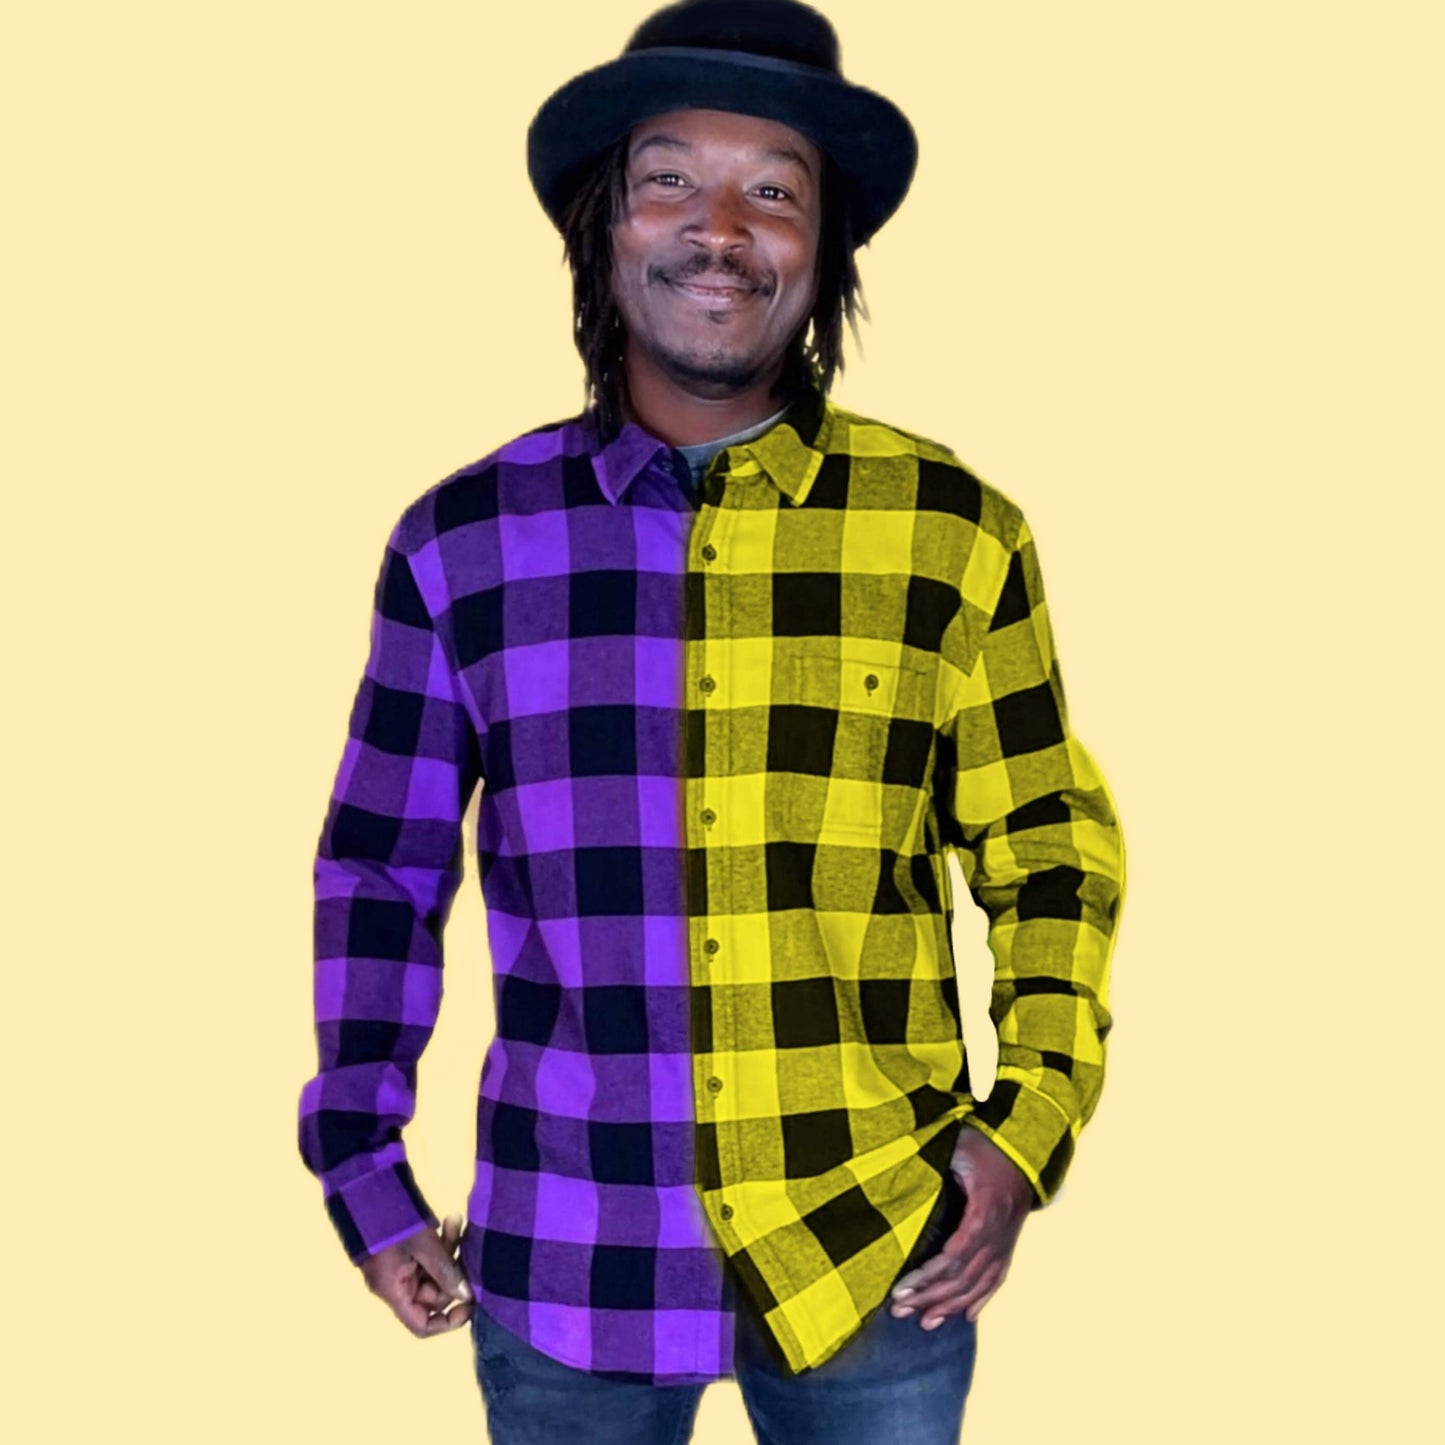 Half Neon Yellow, Purple Tie Dye Buffalo Plaid Flannel Shirt for men and women. Color Block Flannel is Bright and unique. Handmade with quality fiber reactive dyes for vibrant color that lasts.100% Cotton Soft Flannel Fabric, Collar Neckline,  Button Closure, Long Sleeves, front pocket, Machine washable